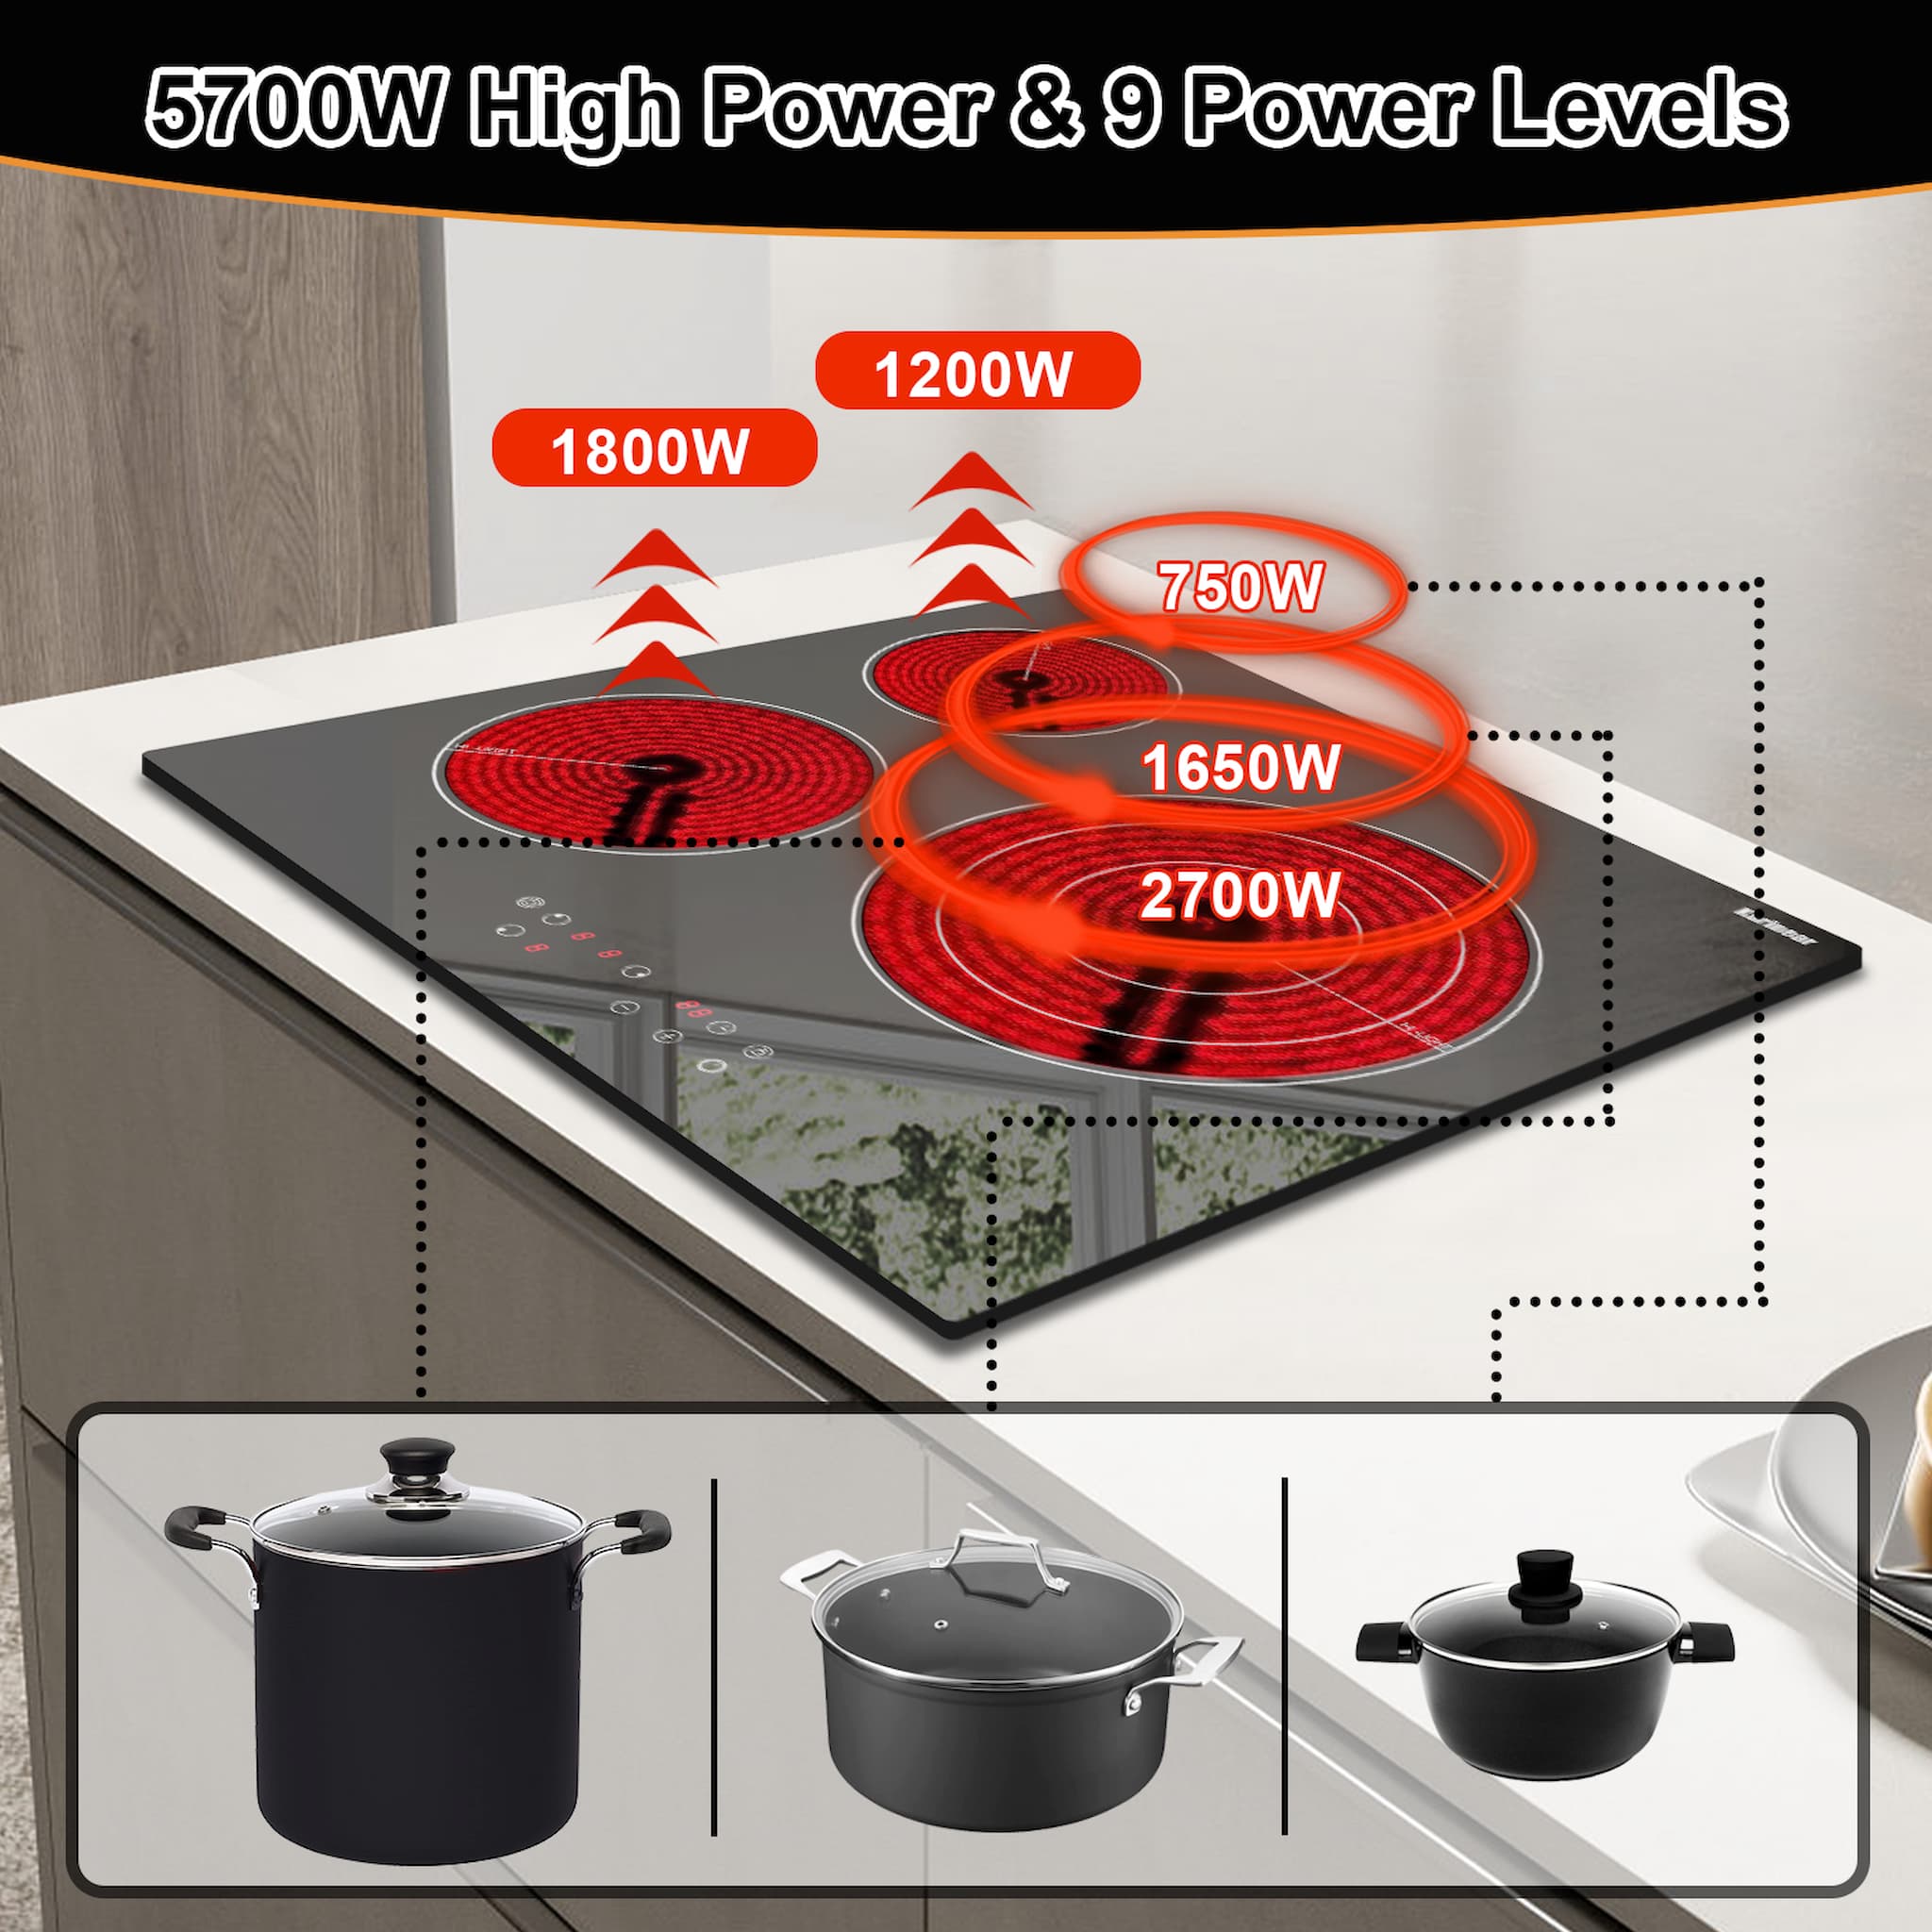 Long press the child lock button for 3 seconds to lock or unlock all buttons of the electric cooktop.